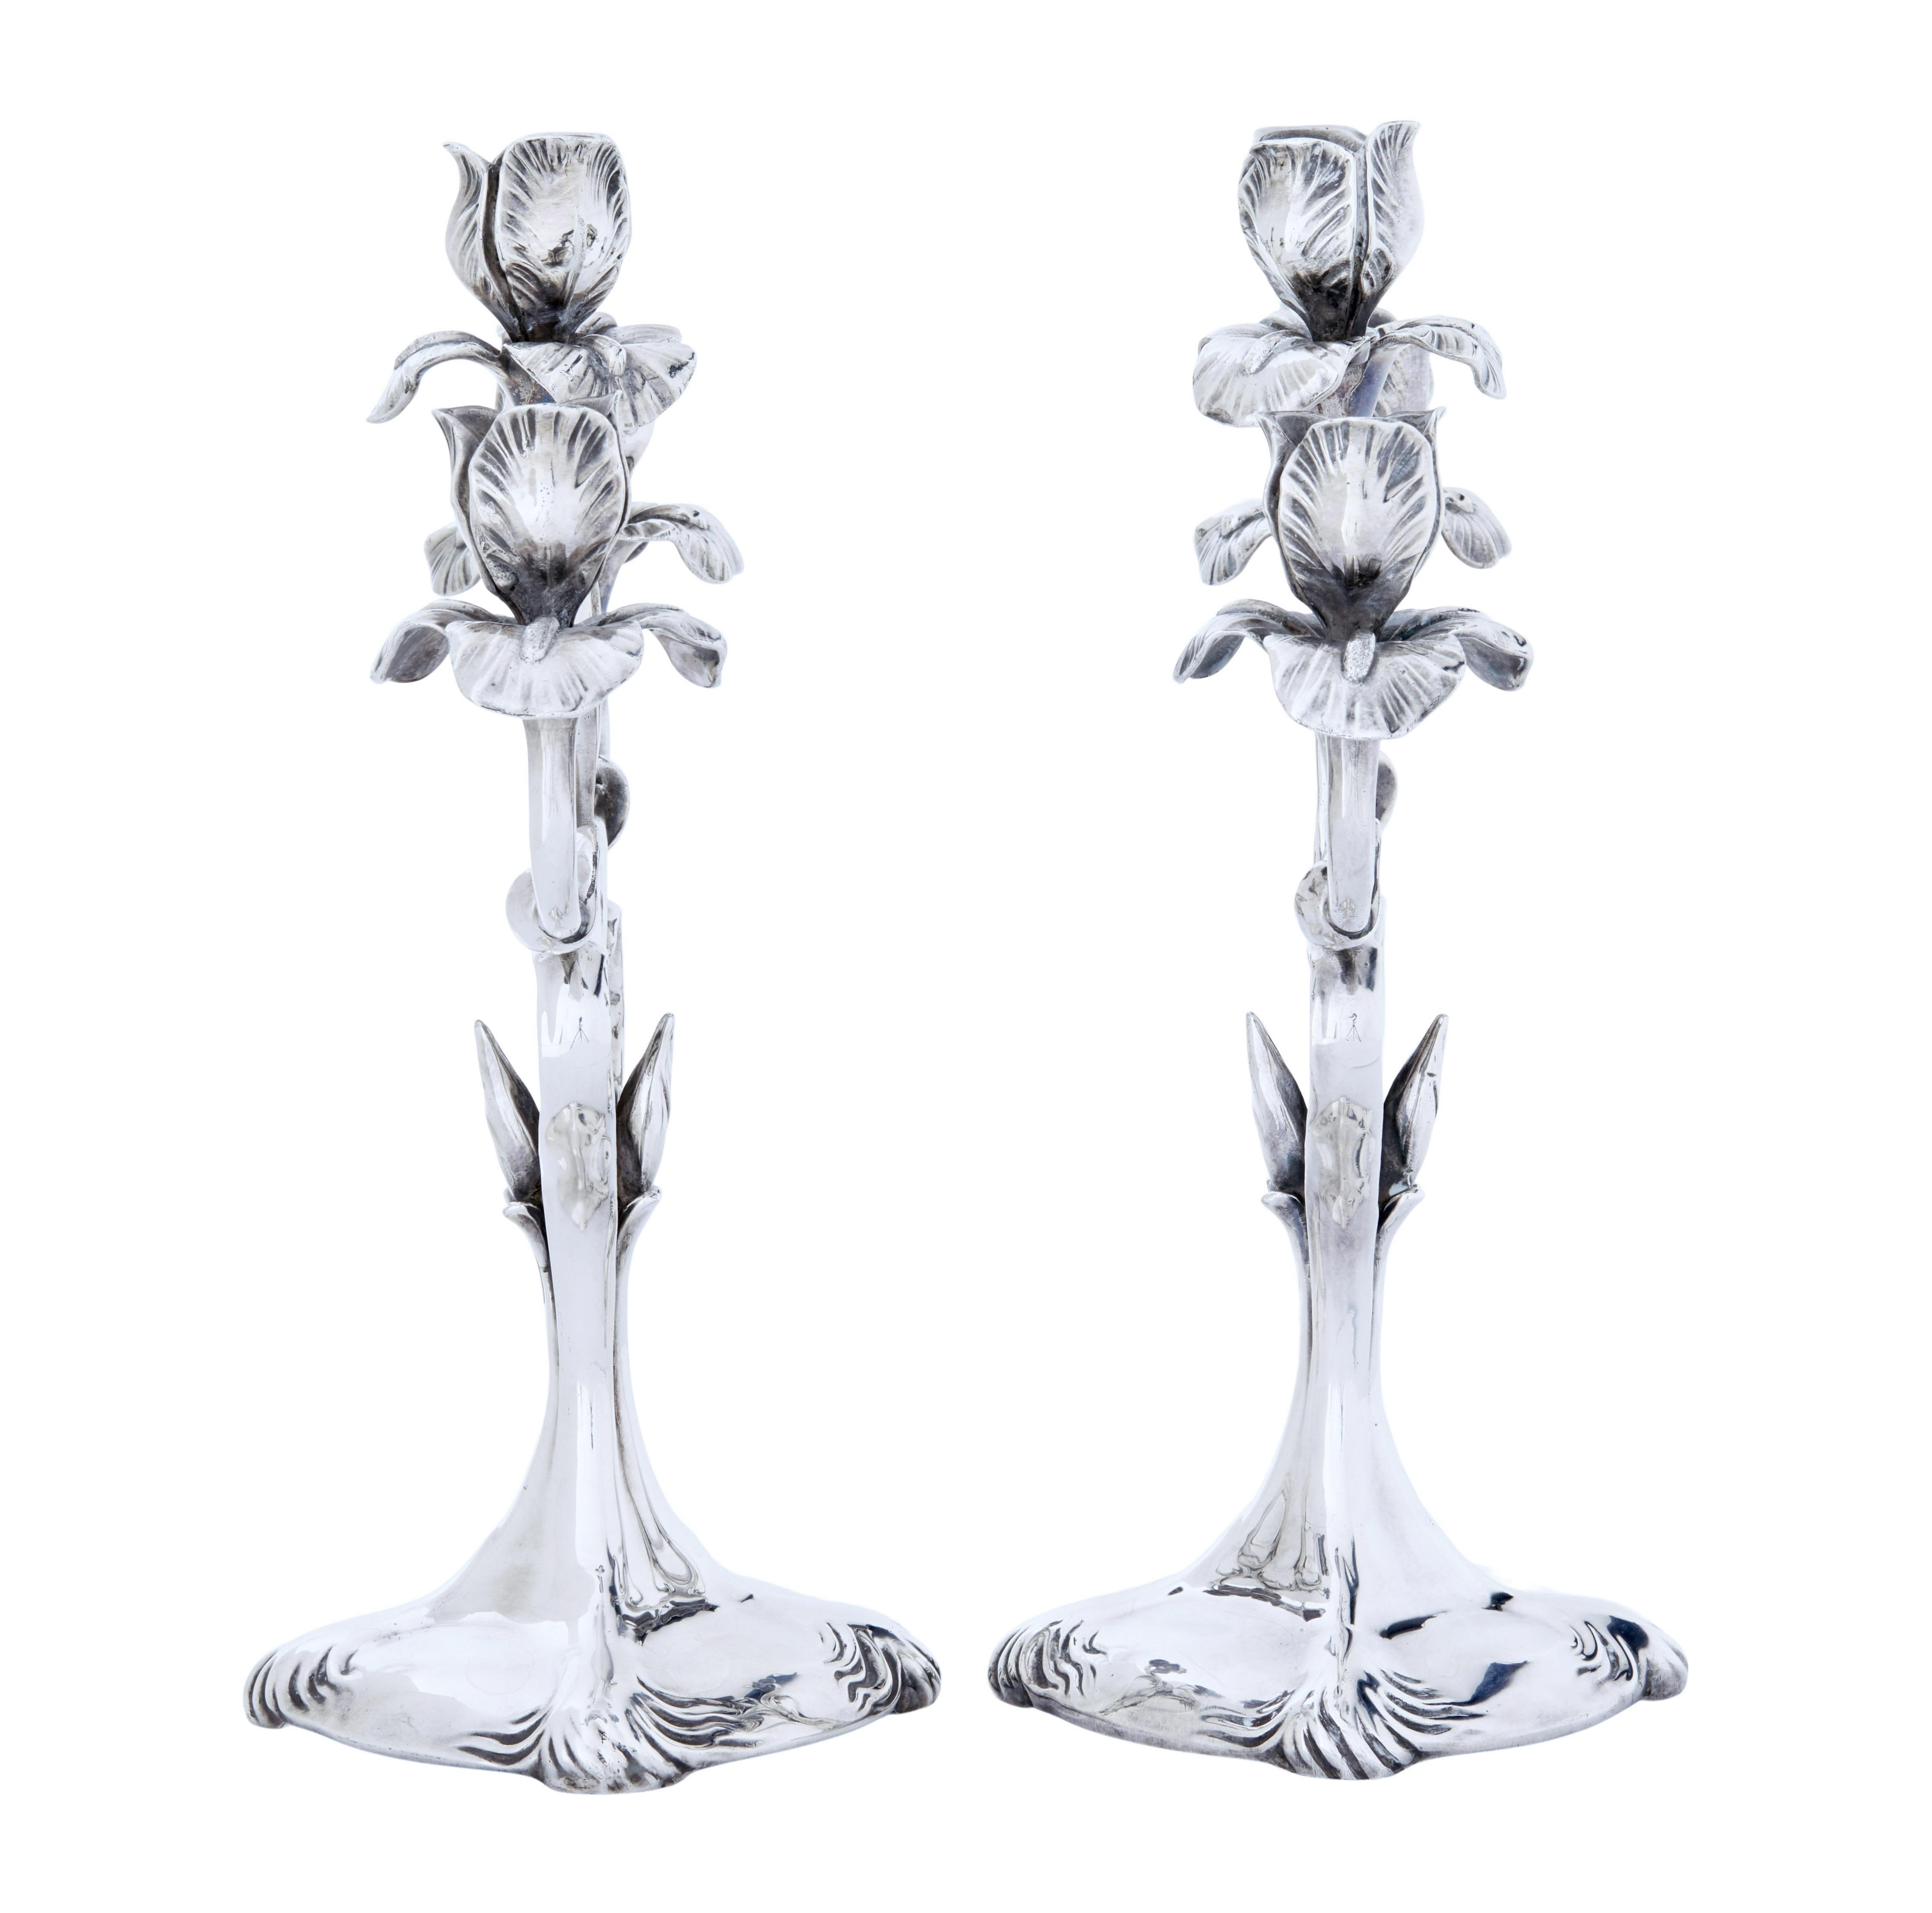 Pair of silver plate candlesticks by christofle circa 1920.

Good quality pair of plate candlesticks by well known maker christofle very much in the art nouveau taste.

3 candle arms with tulip and leaf cups, flowing down to flat